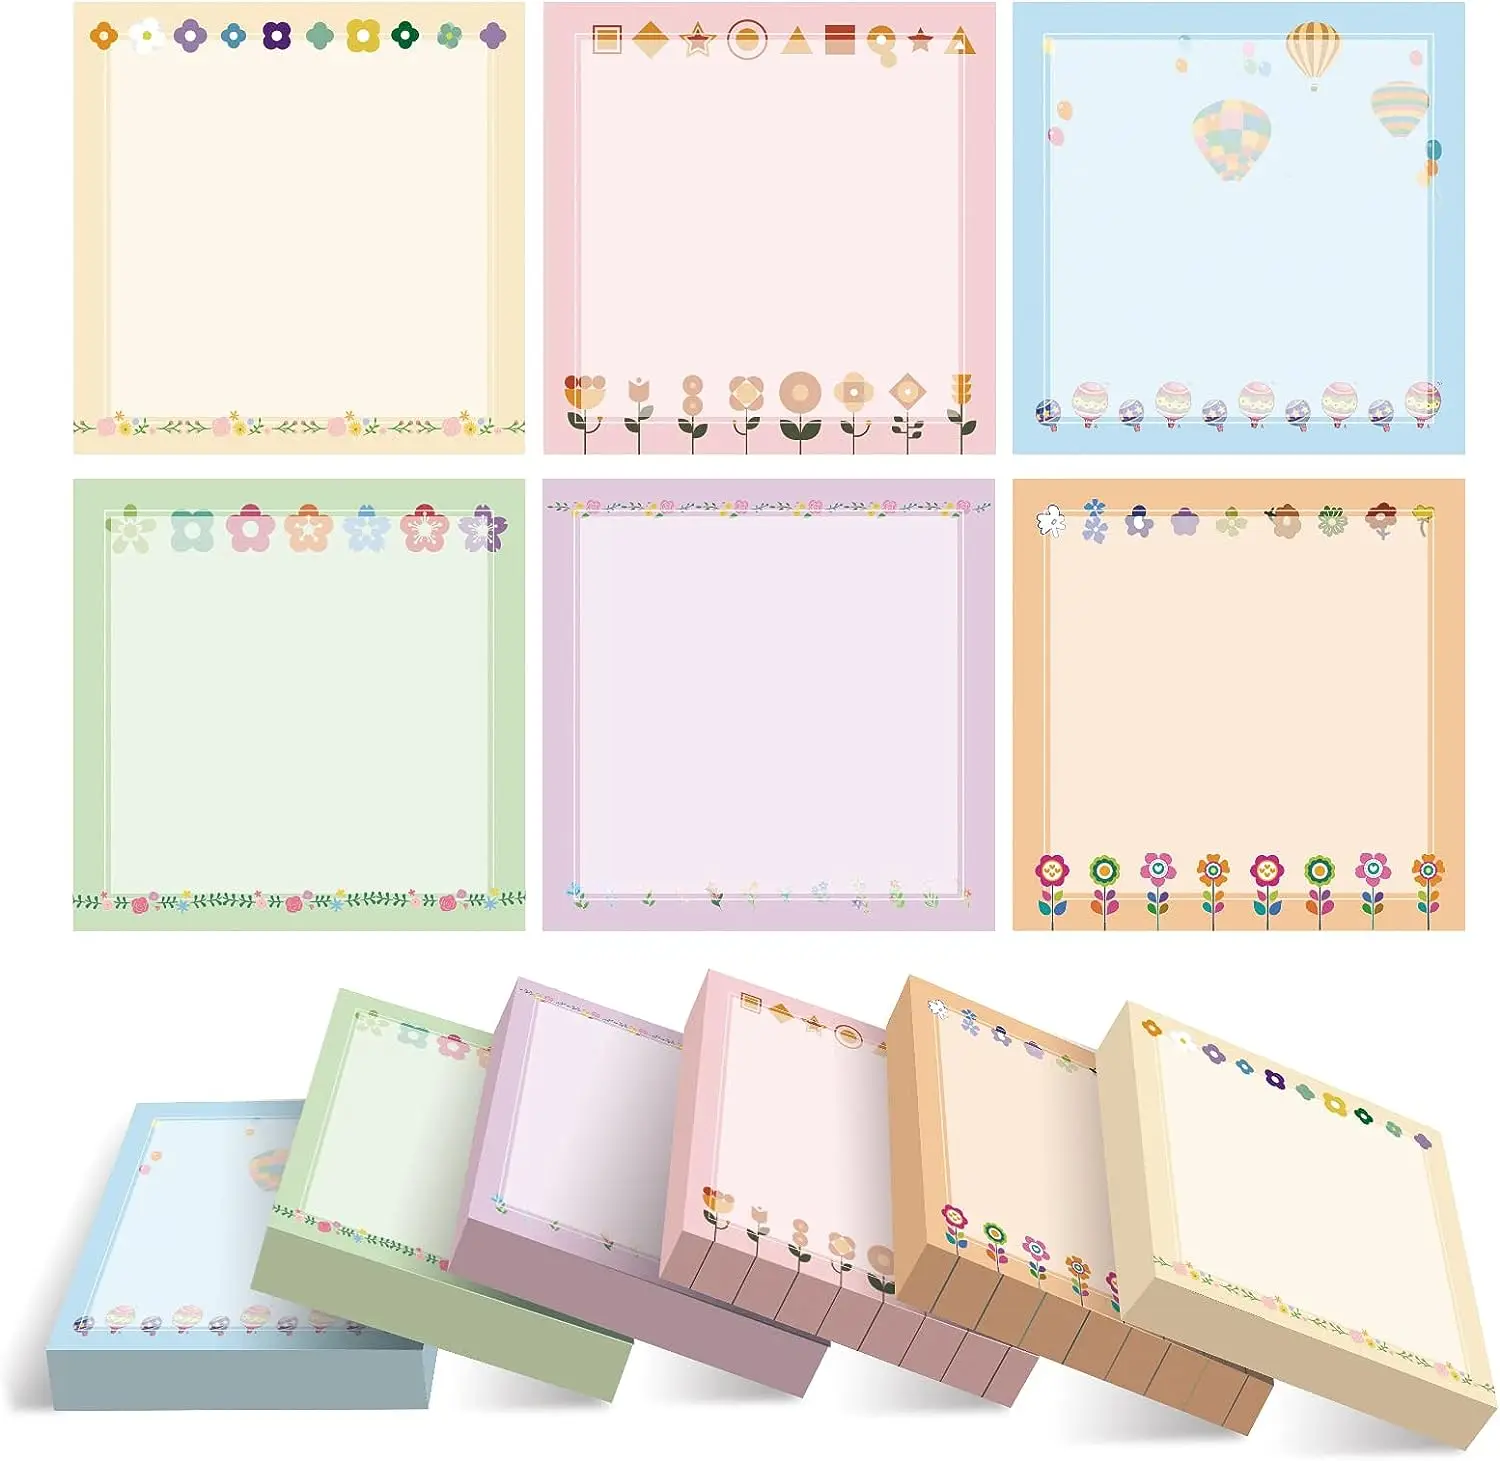 

6 Packs/Set Sticky Notes 600 Sheets Memo Pad Self-Stick Pads, 6 Multiple Designs Watermark Adhesive Notepads, Post It Notes